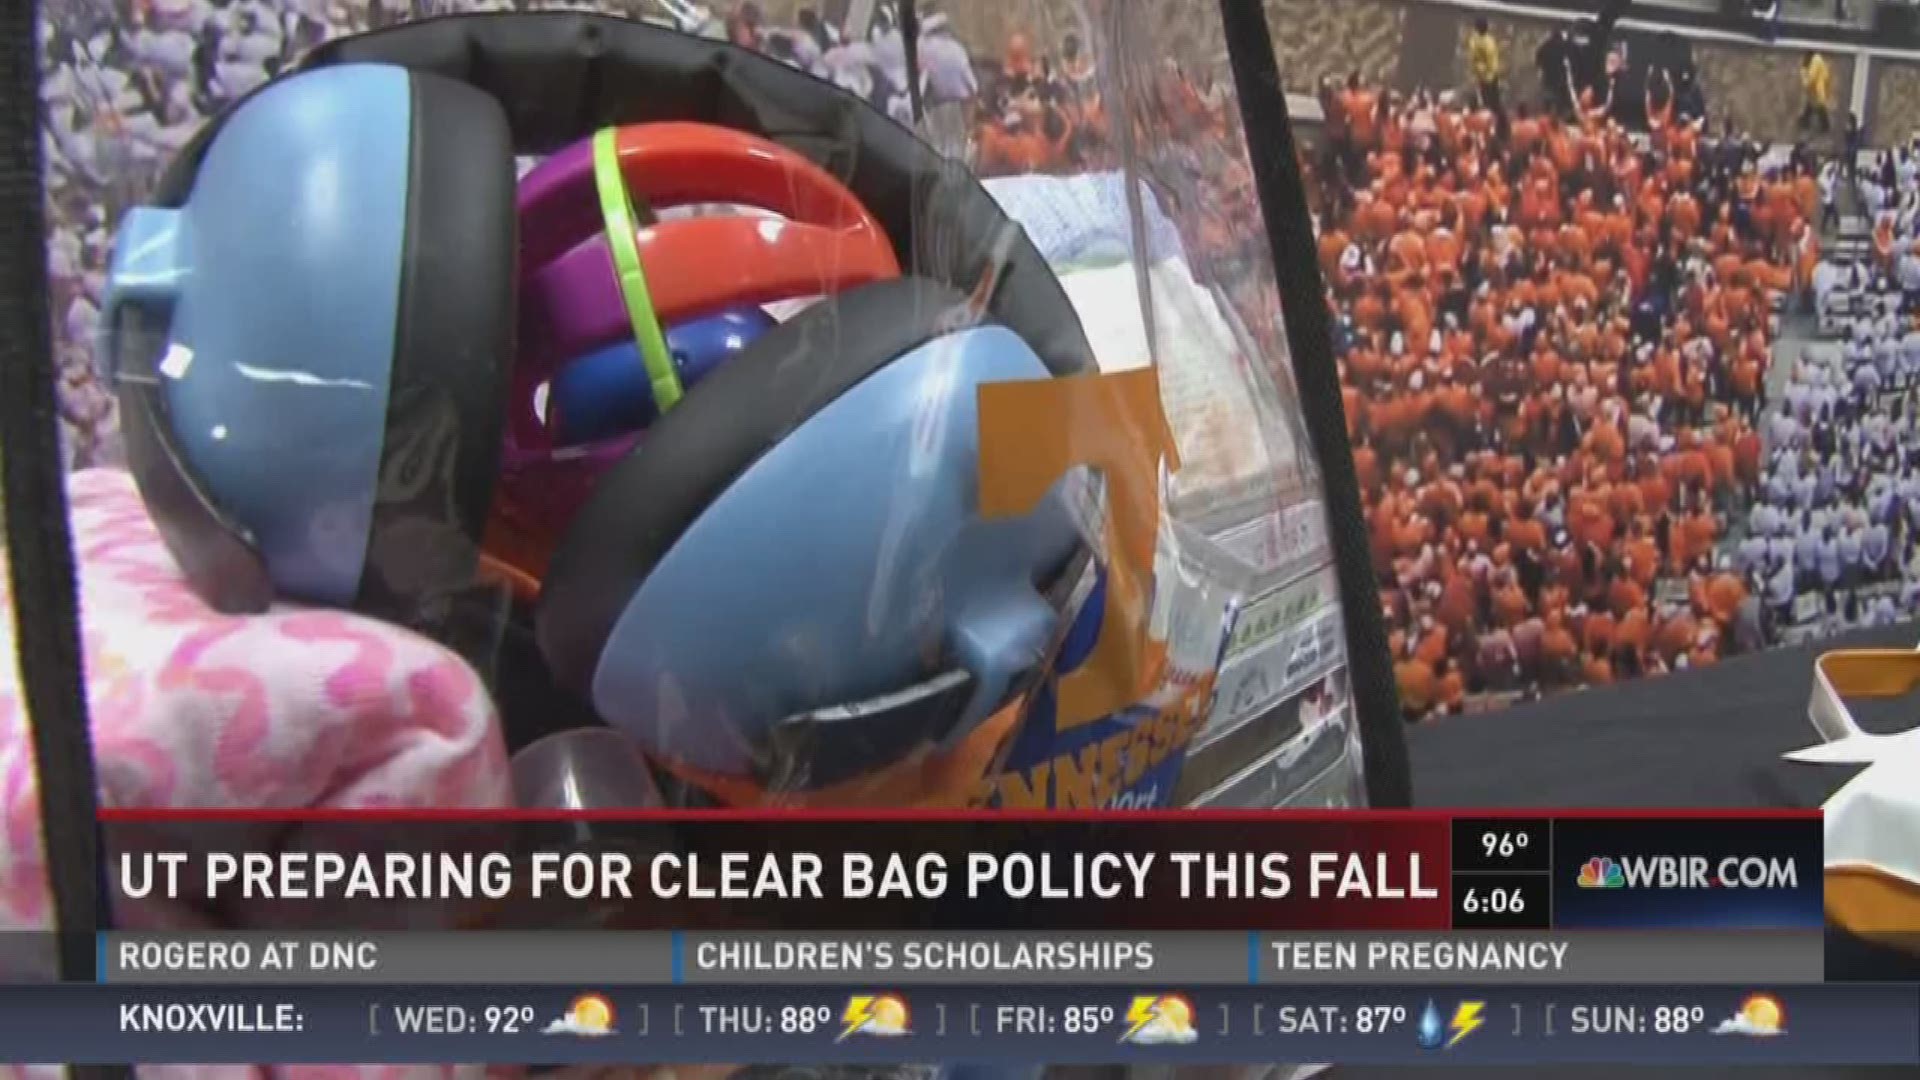 UT fans won't be able to bring in anything but a clear bag to events after recent changes.